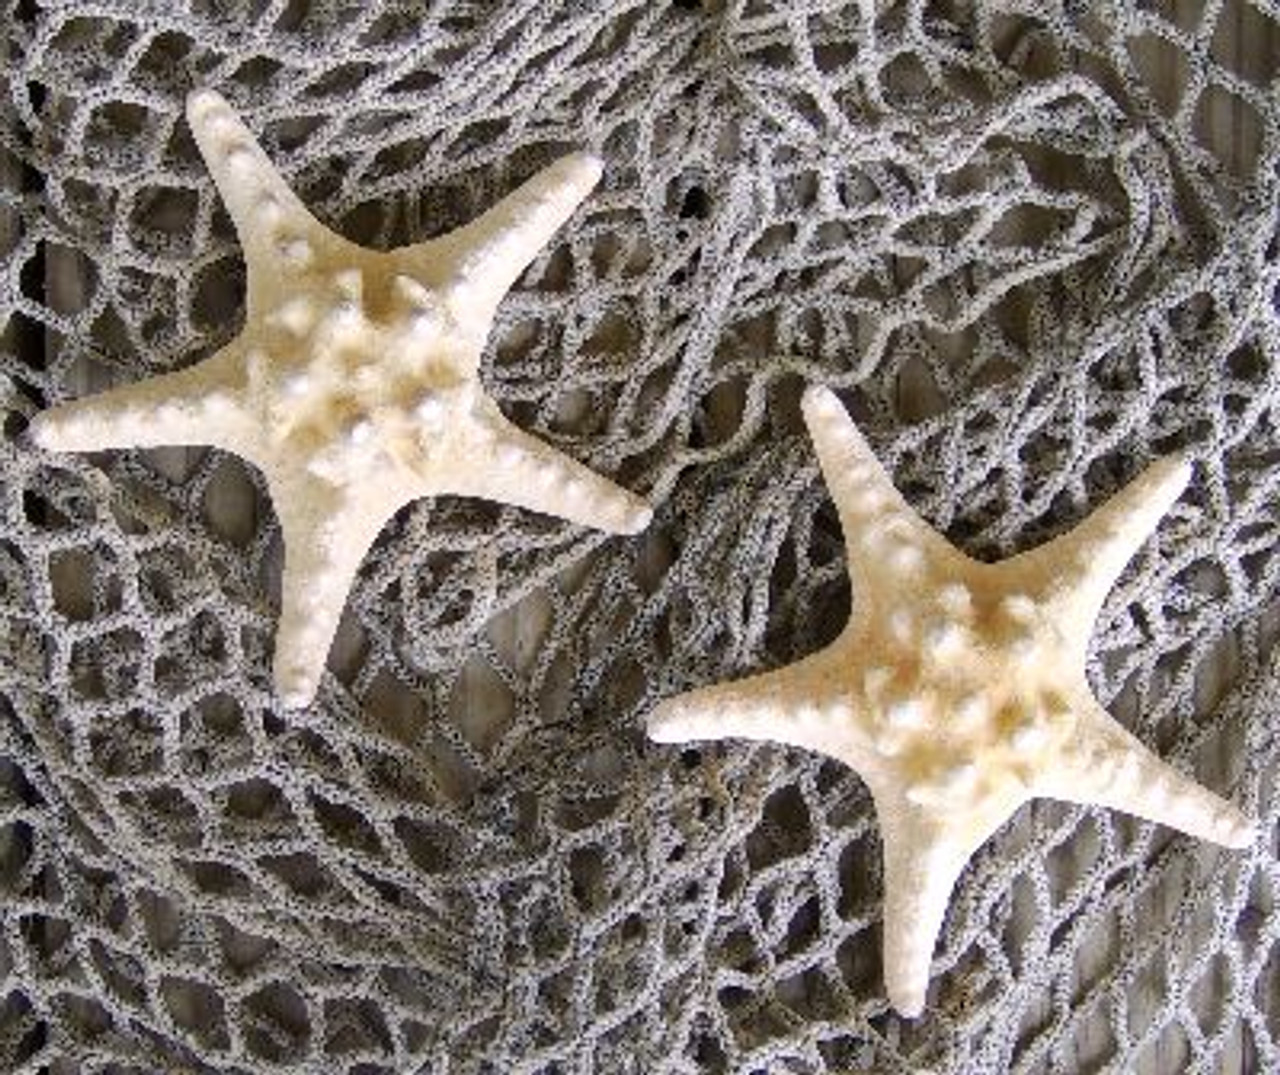 Nautical Seasons Natural Knobby Starfish Combo with our Heavier